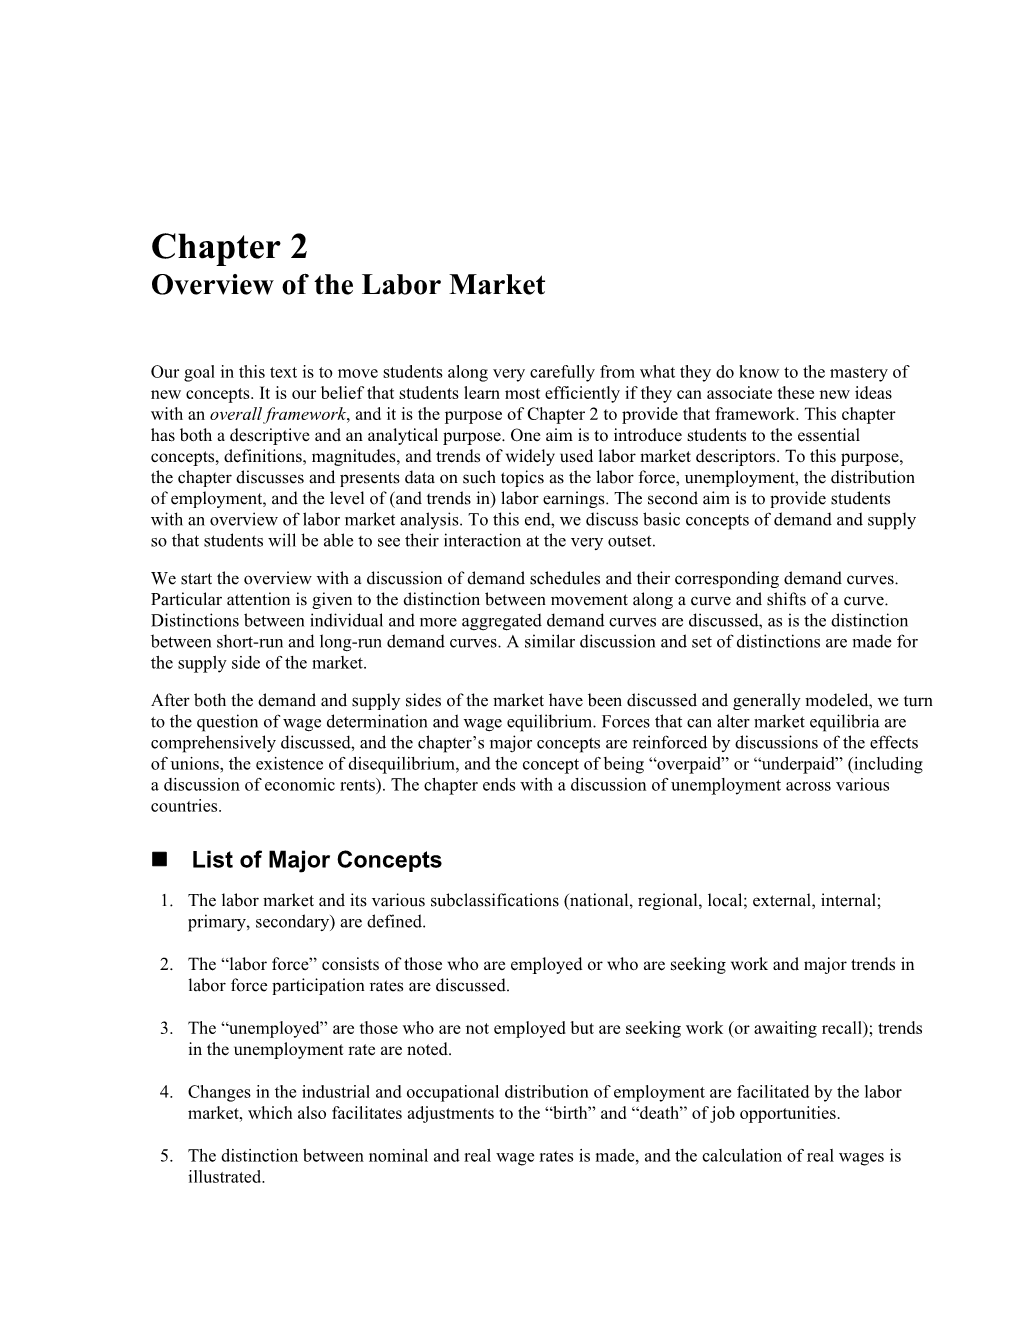 Chapter 2 Overview of the Labor Market